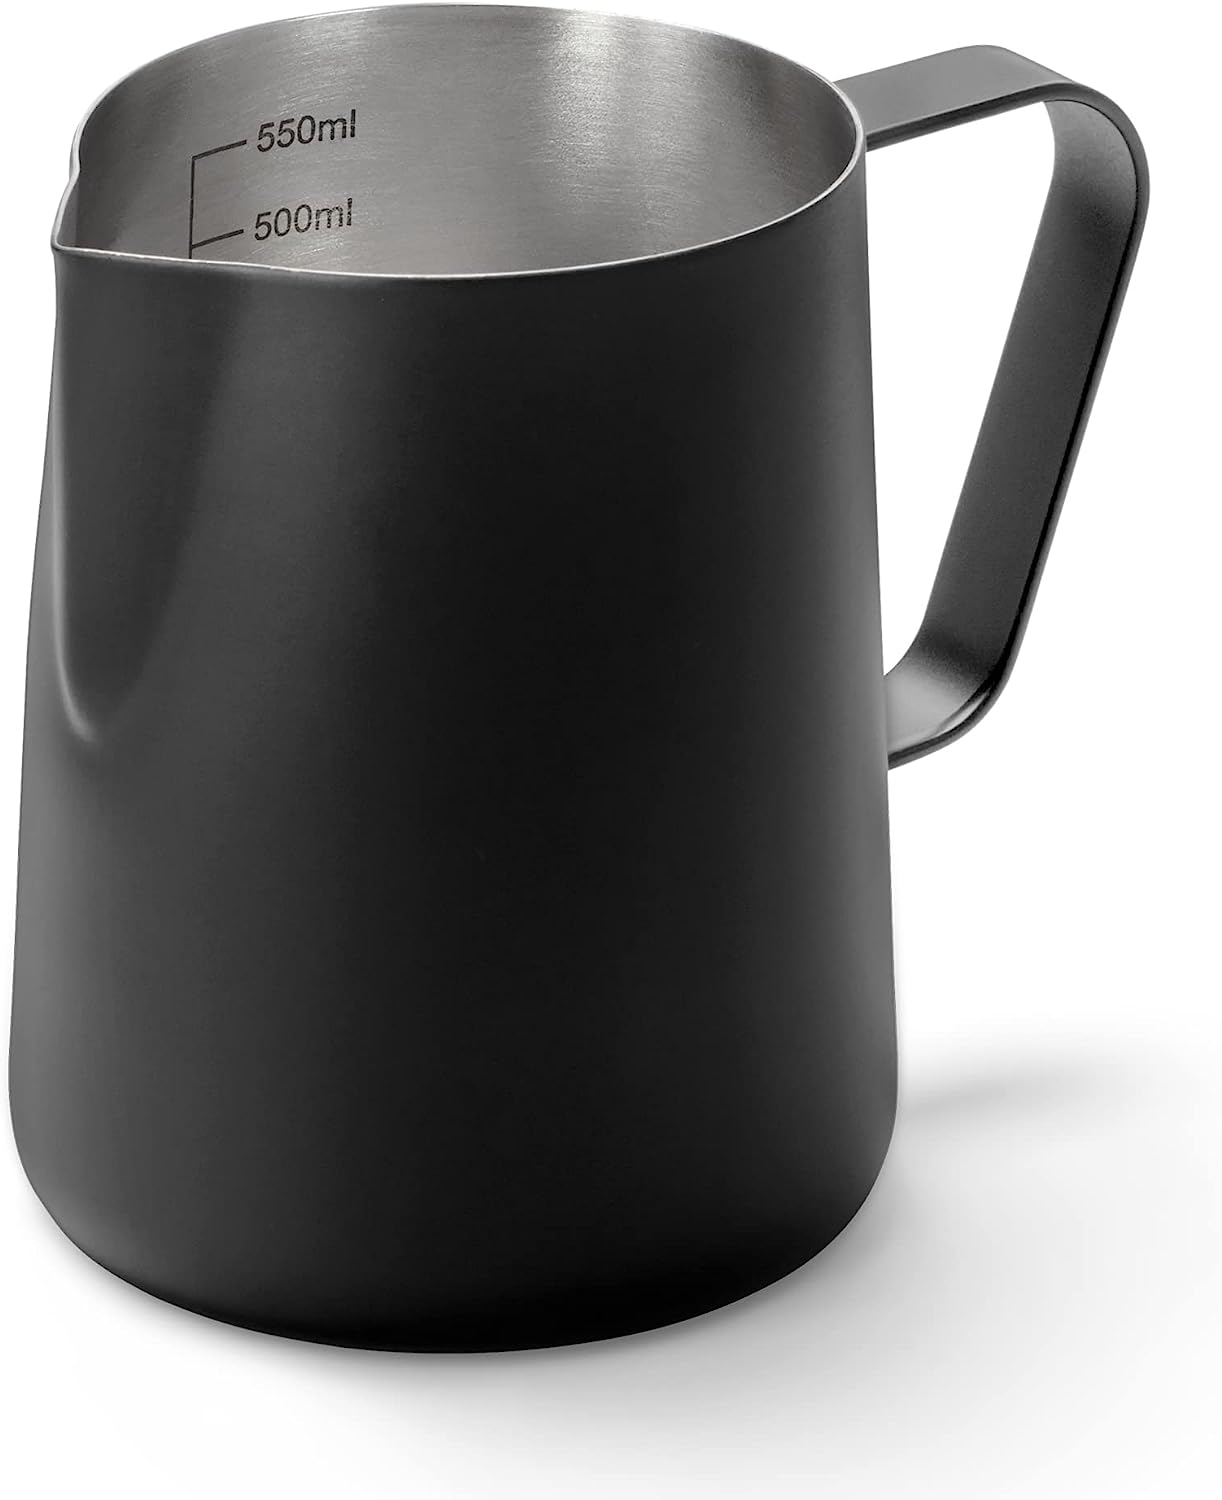 Tchibo Stainless Steel Milk Jug (600ml), Barista Accessory for Manual Milk Frothing - Black Painted